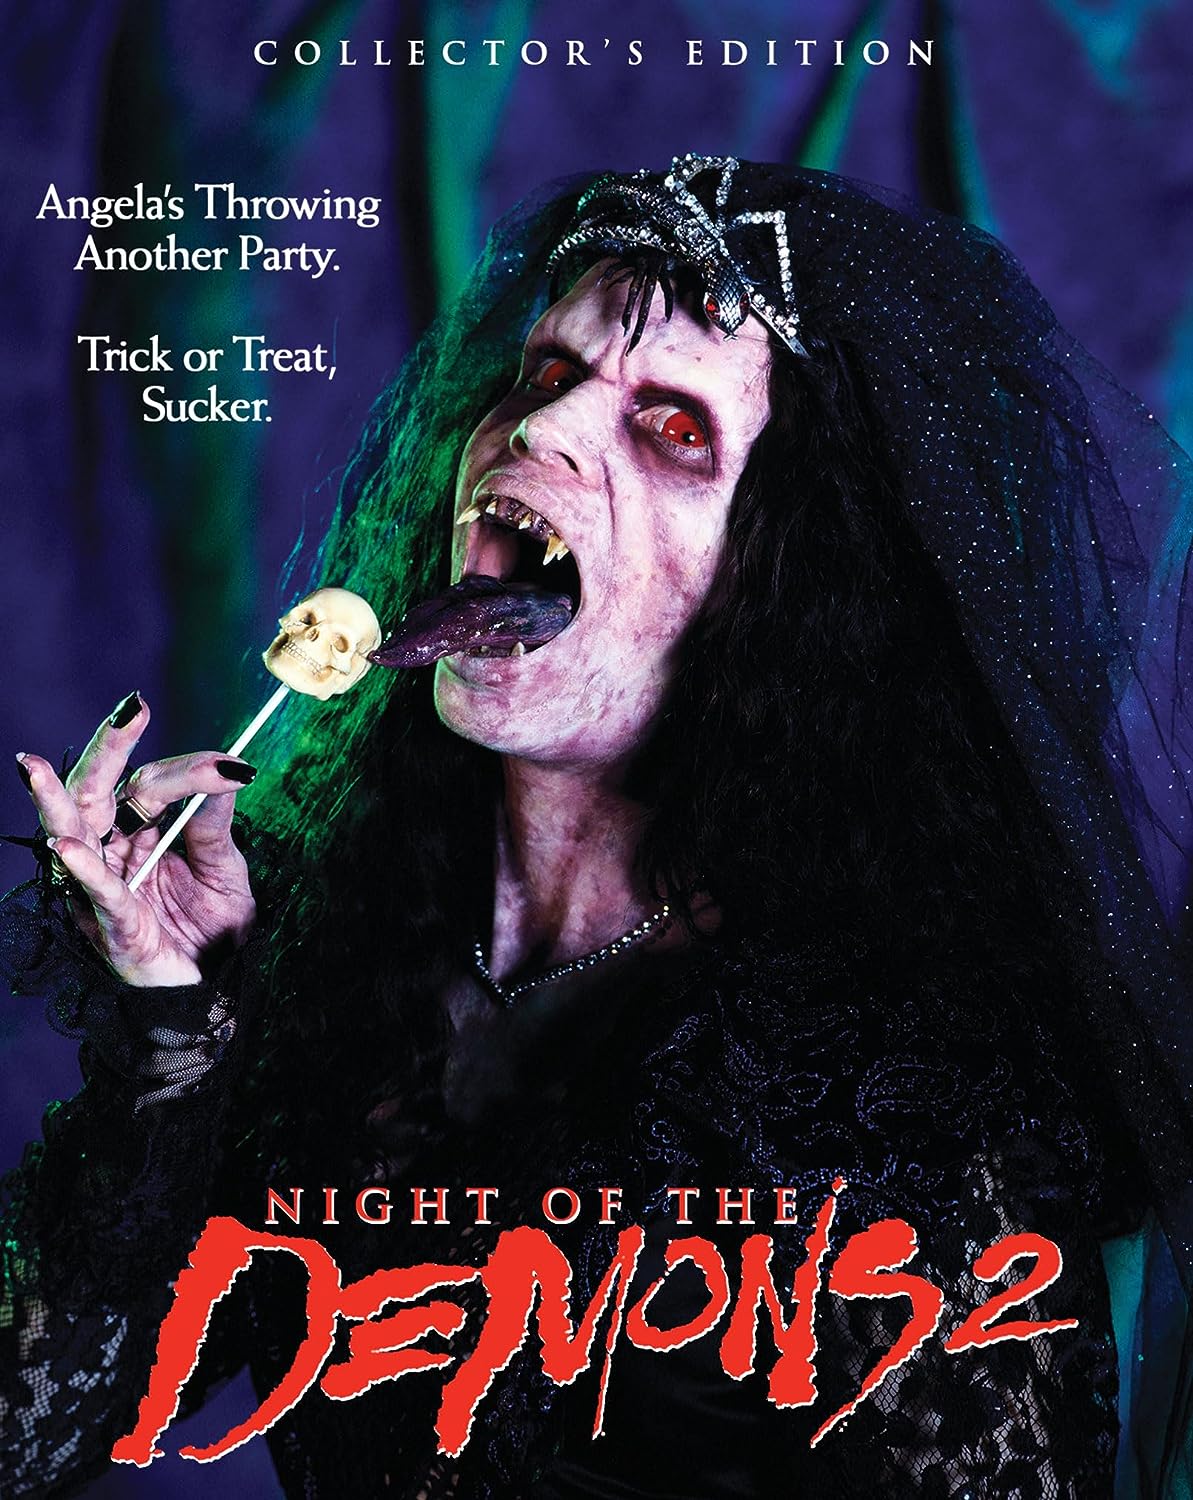 NIGHT OF THE DEMONS 2 (COLLECTOR'S EDITION) BLU-RAY